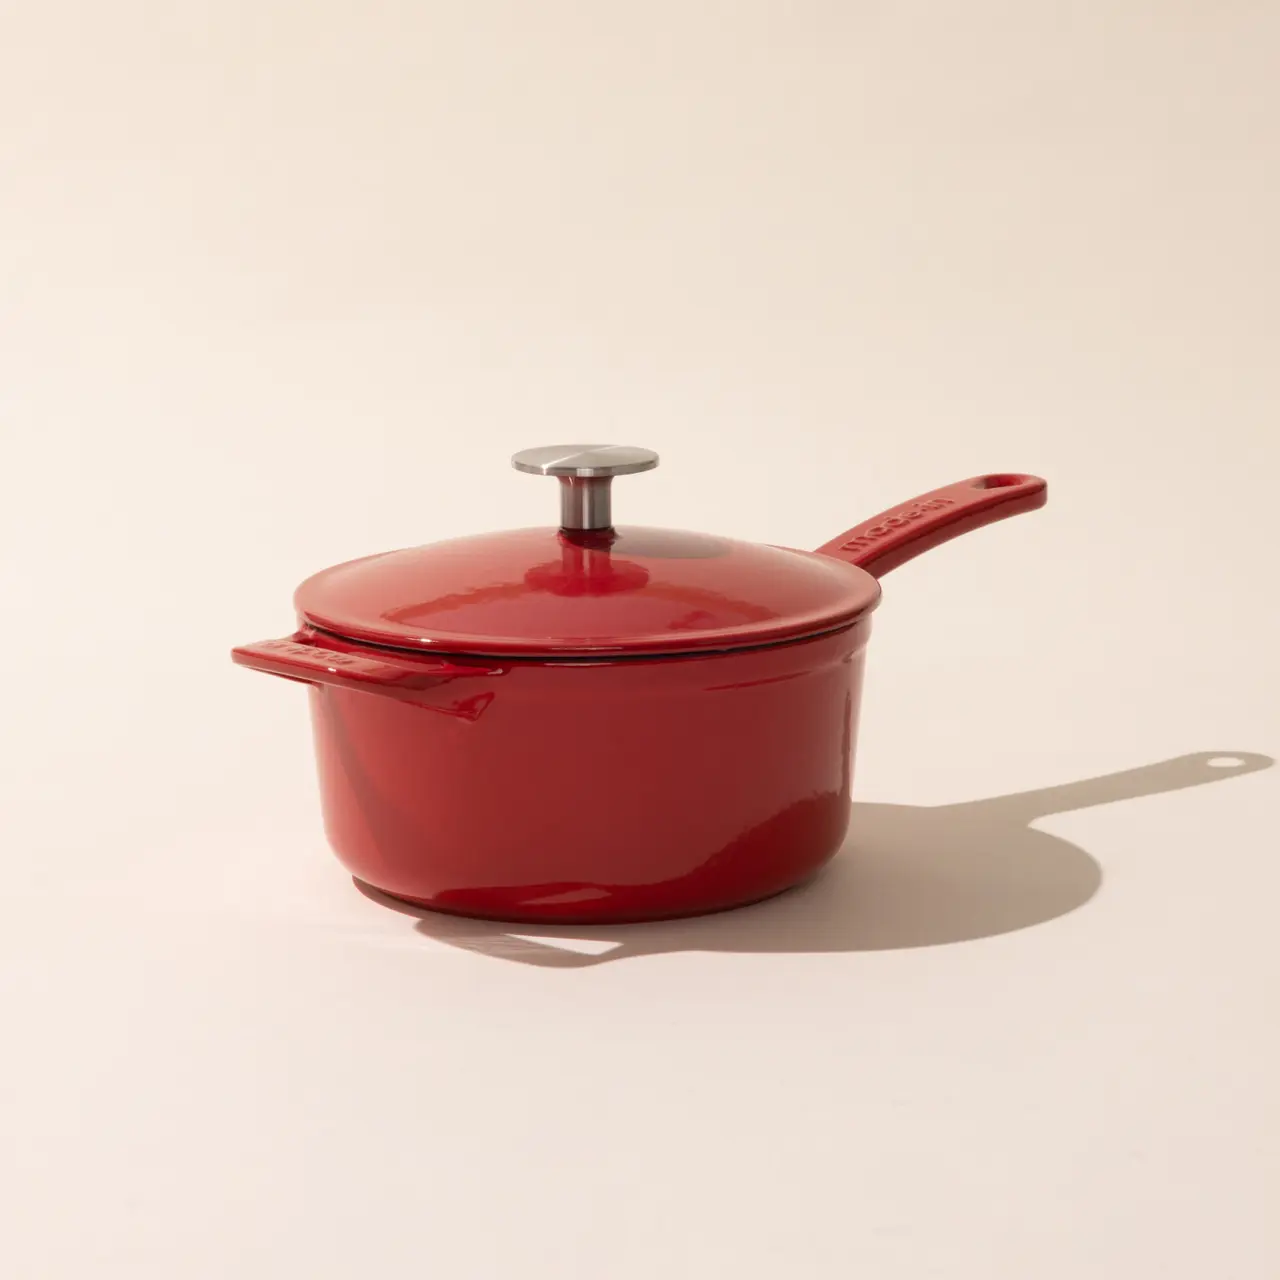 enameled cast iron saucepan made in red with lid